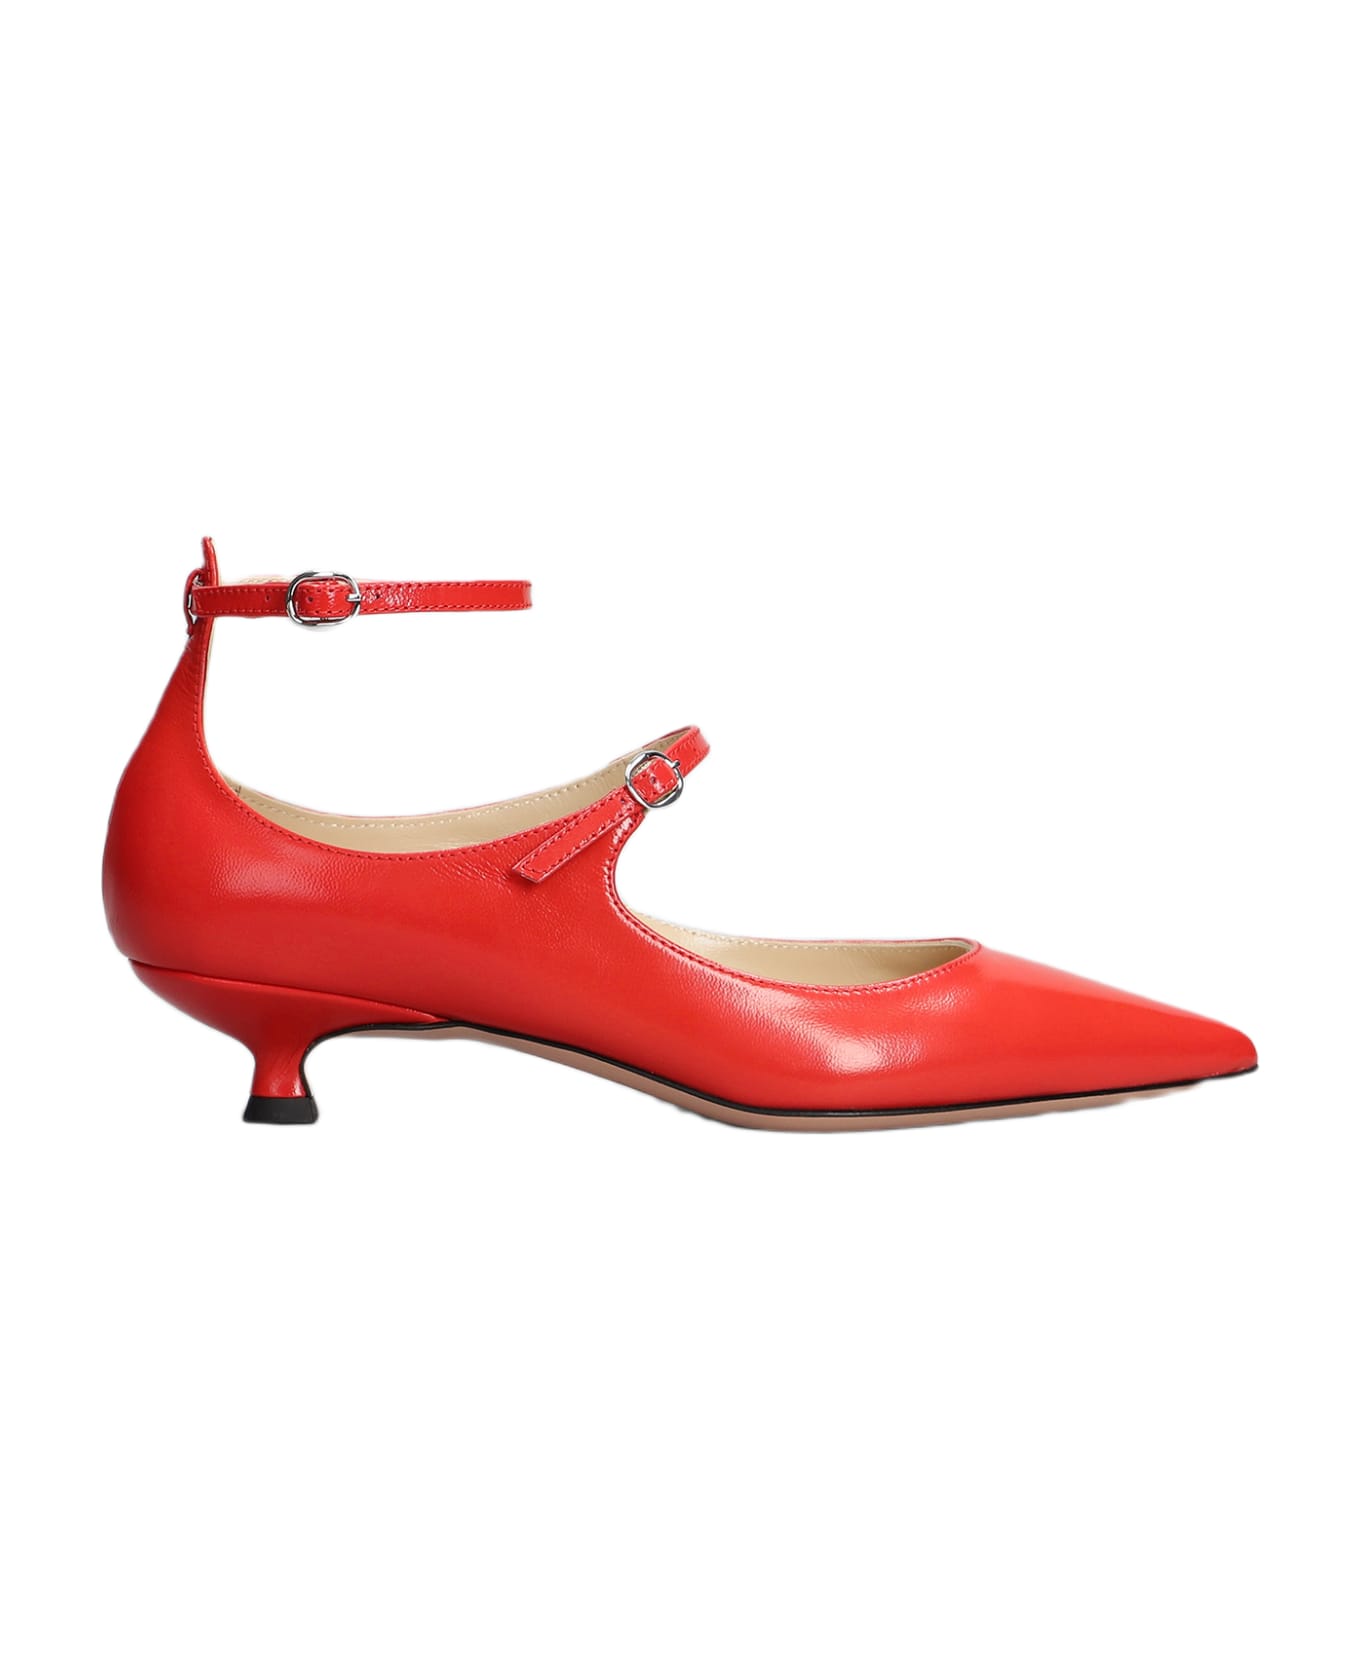 Marc Ellis Pumps In Red Leather - red ハイヒール